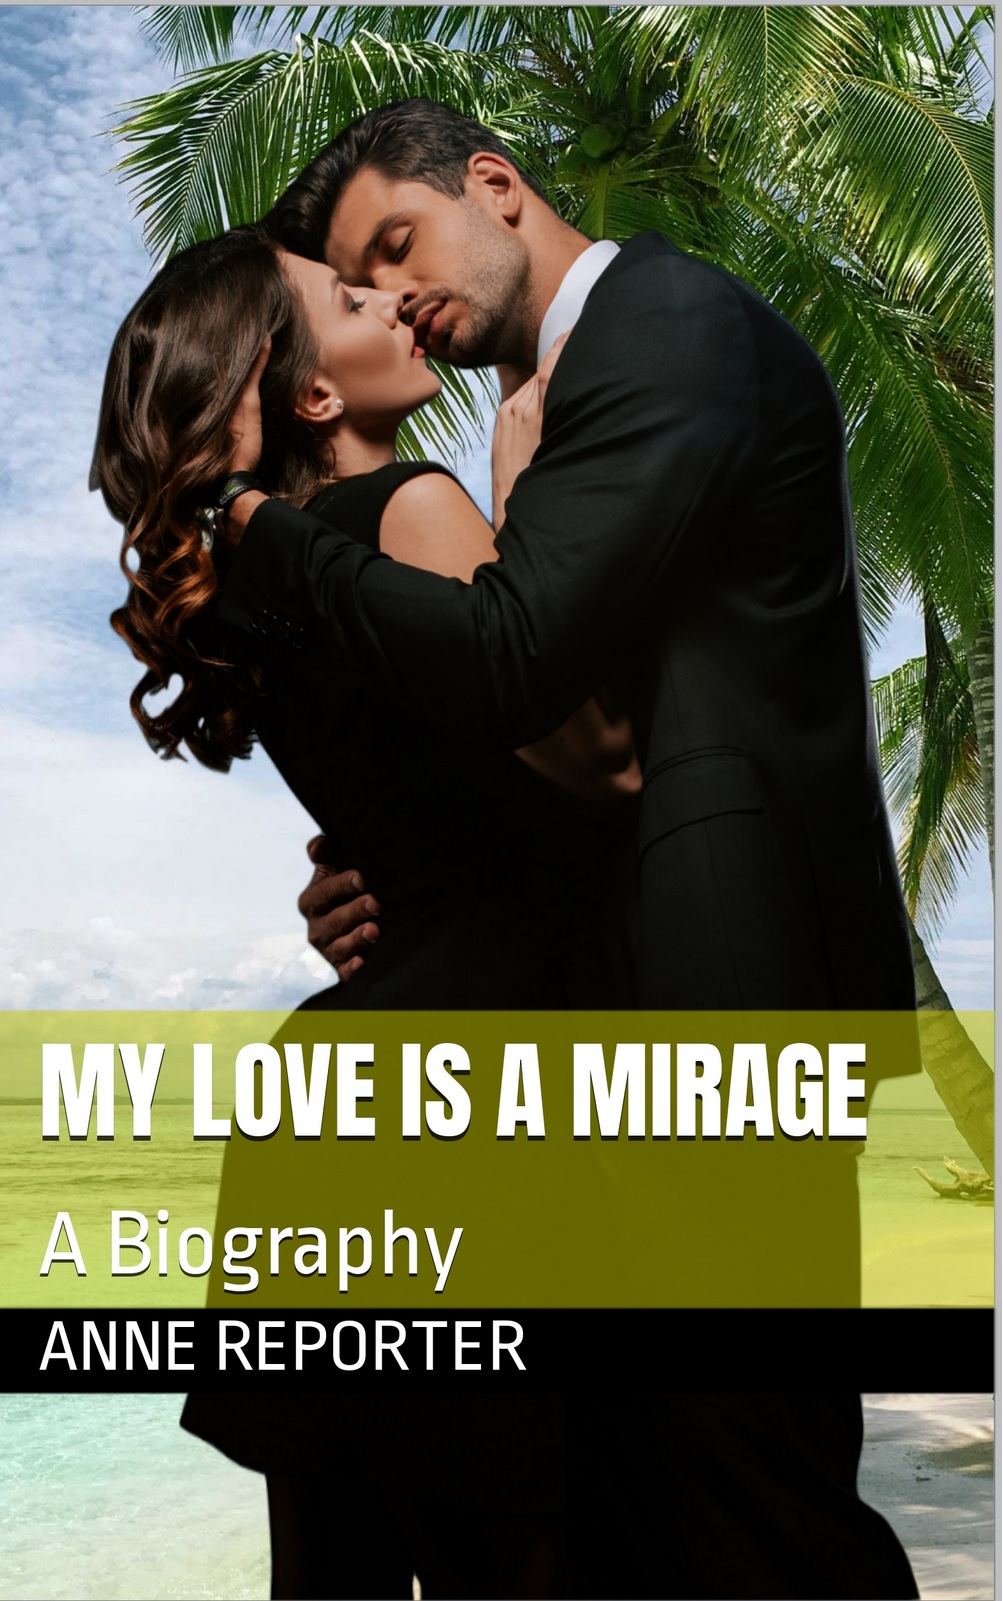 My Love is a Mirage by Anne